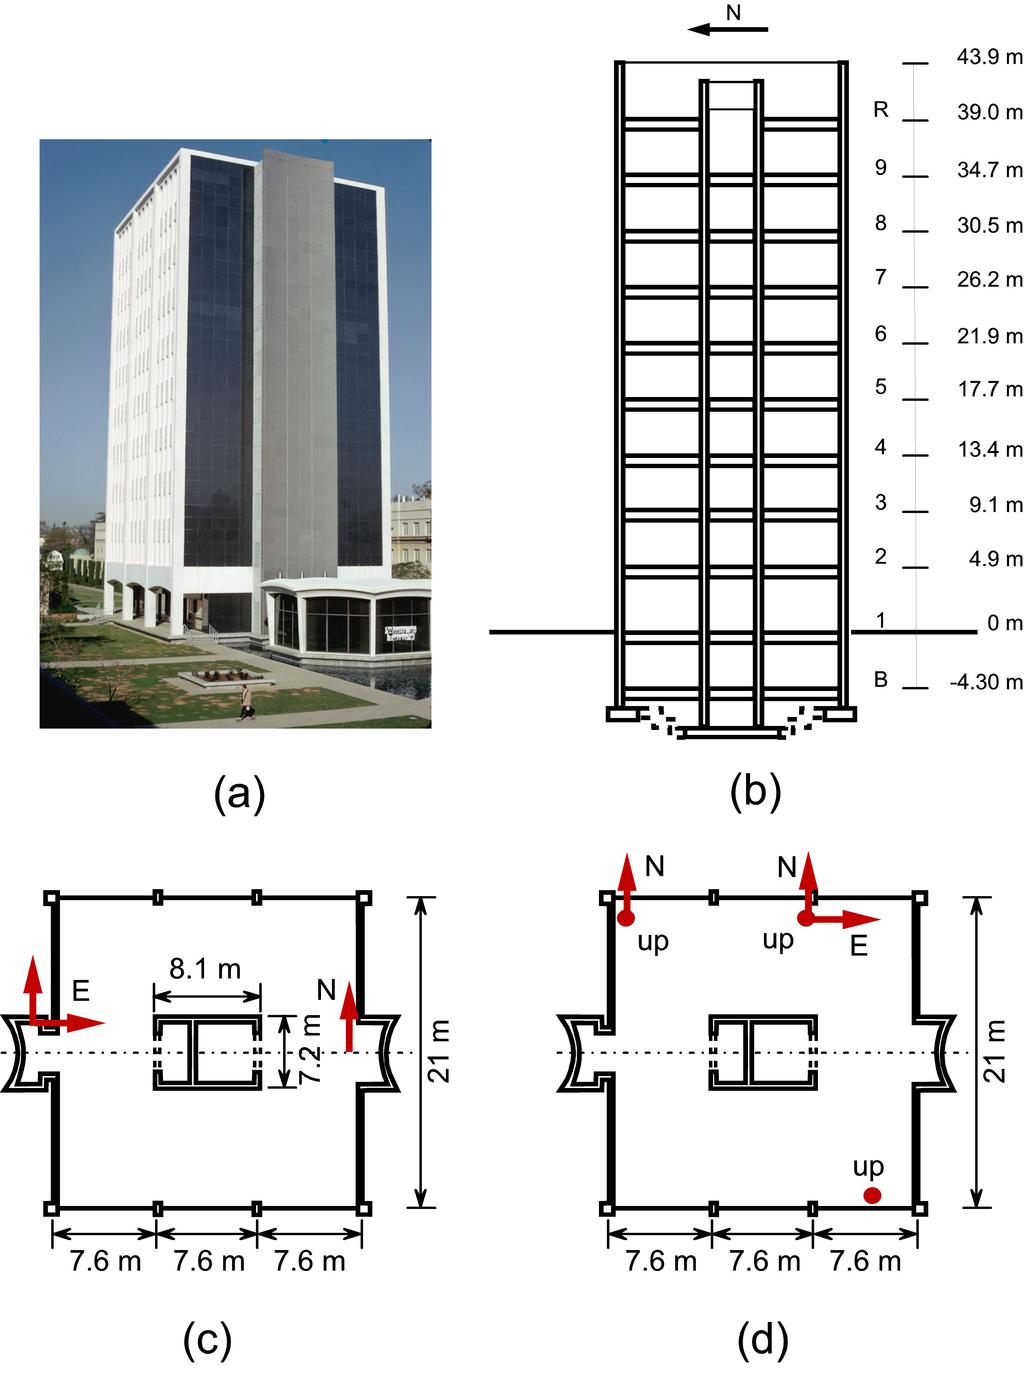 Fig. 1 Millikan library: a) photo (taken by M. Trifunac); b) vertical cross-section and c) typical floor layout (redrawn from Snieder and Safak, 2006); (d) sensor locations at basement.